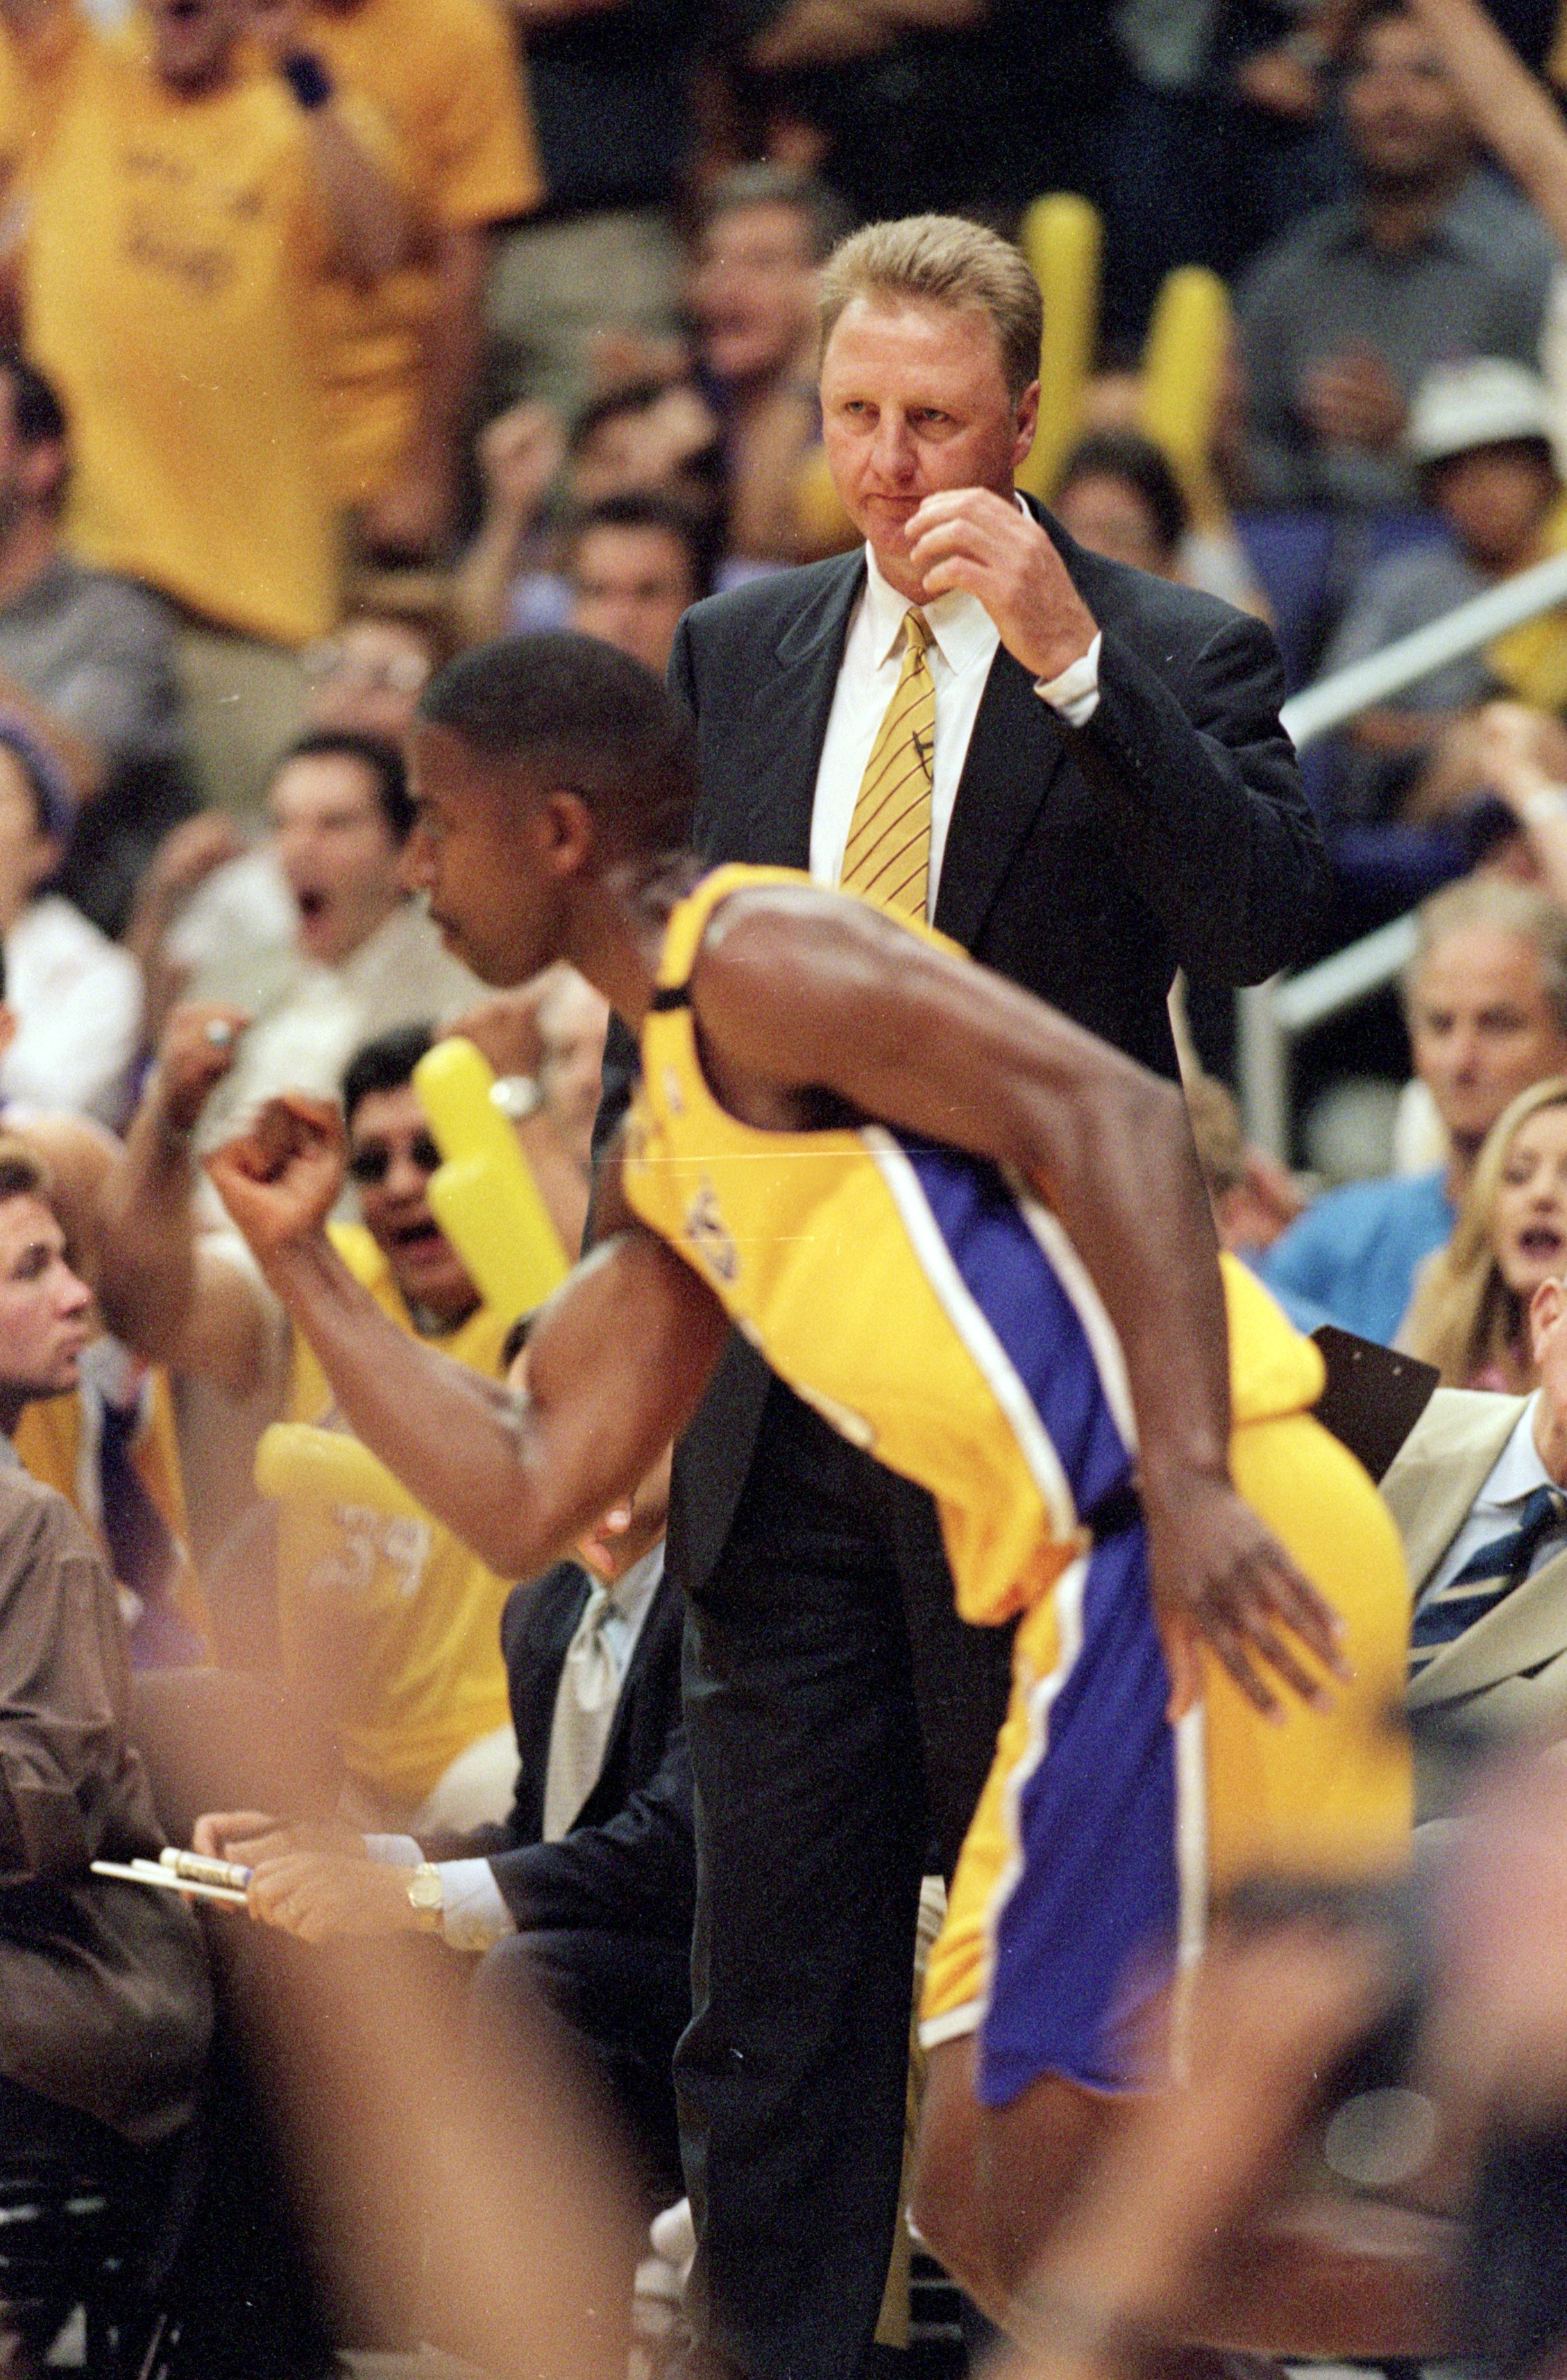 19 Jun 2000: Head Coach Larry Bird  of the Indiana Pacers keeps his eye on A.C. Green #45 of the  Los Angeles Lakers during the NBA Finals Game 6 at the Staples Center in Los Angeles, California.  The Lakers defeated the Pacers in 116-111.    NOTE TO USER